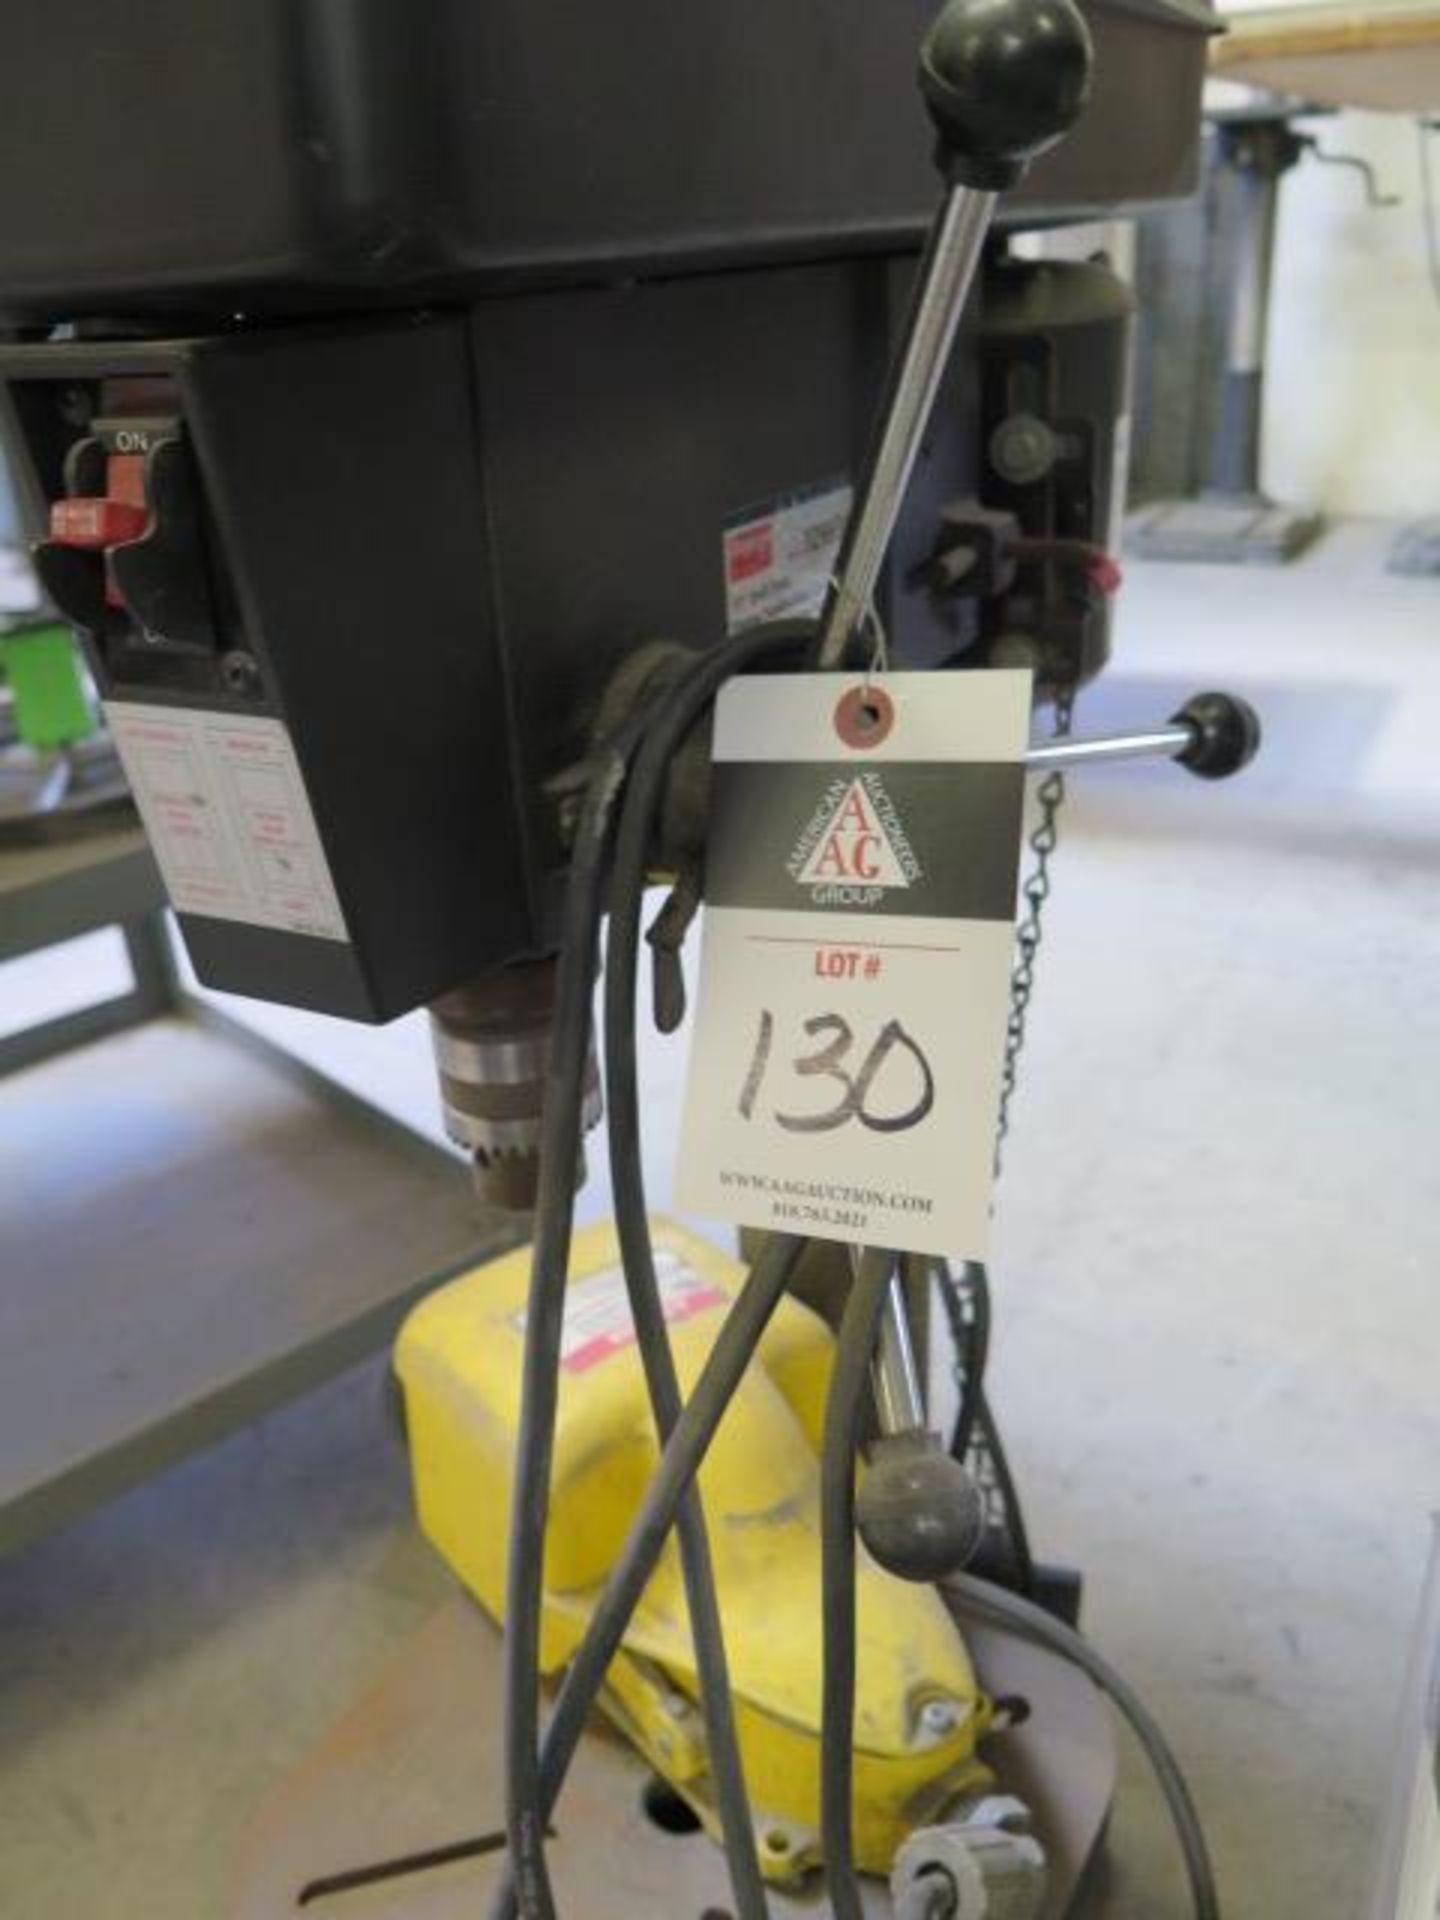 Dayton 13" Bench Model Drill Press (SOLD AS-IS - NO WARRANTY) - Image 5 of 5